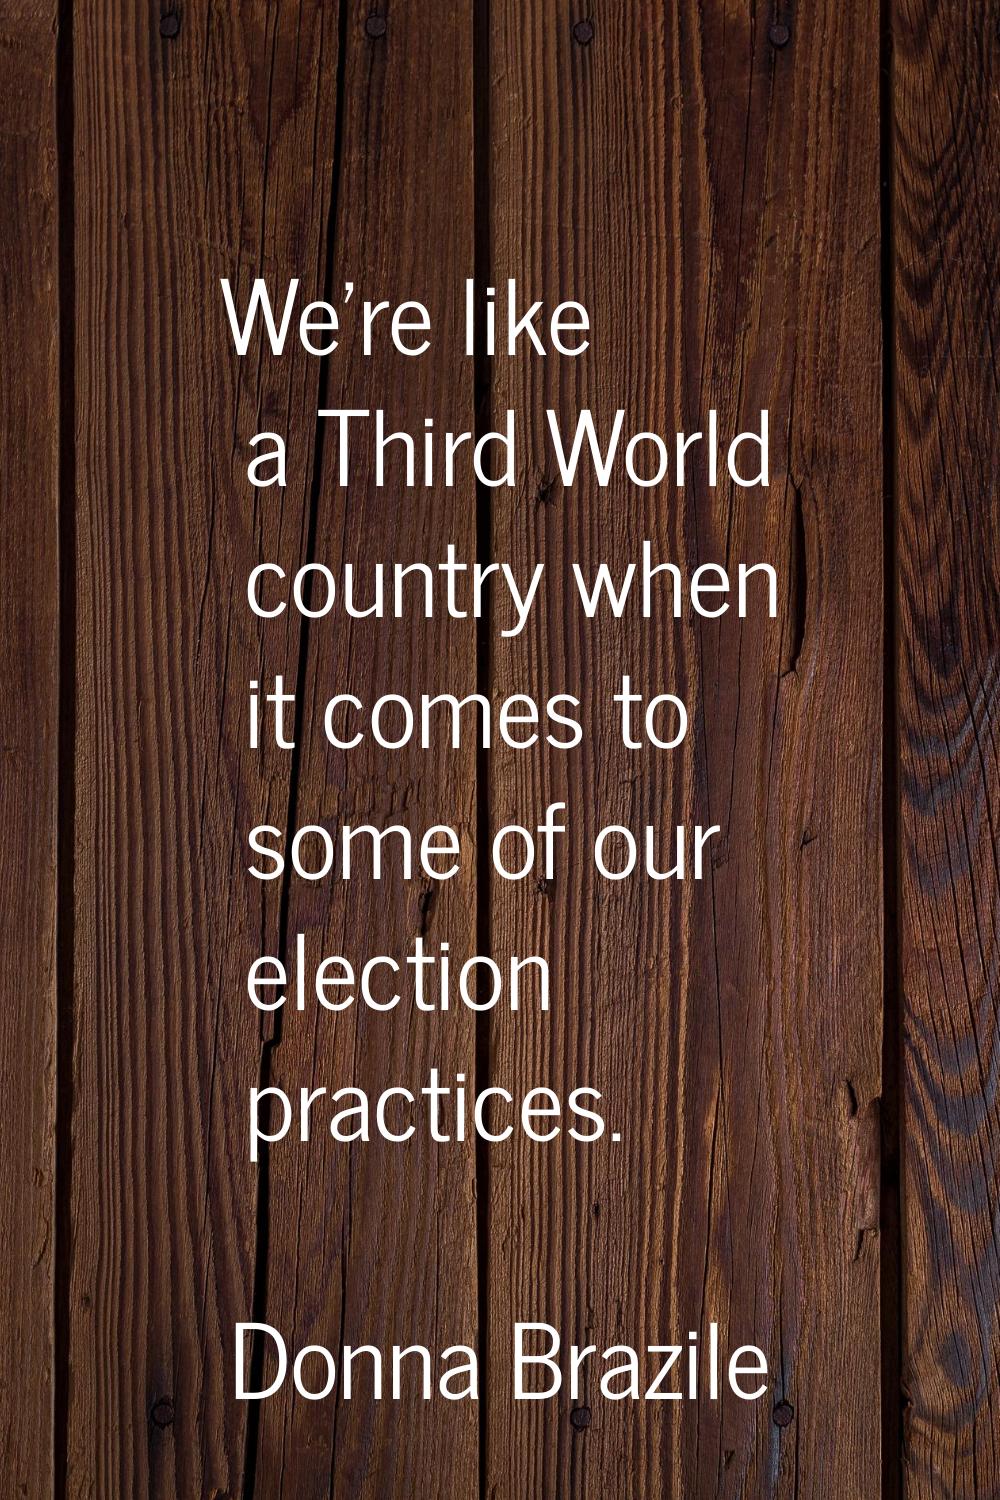 We're like a Third World country when it comes to some of our election practices.